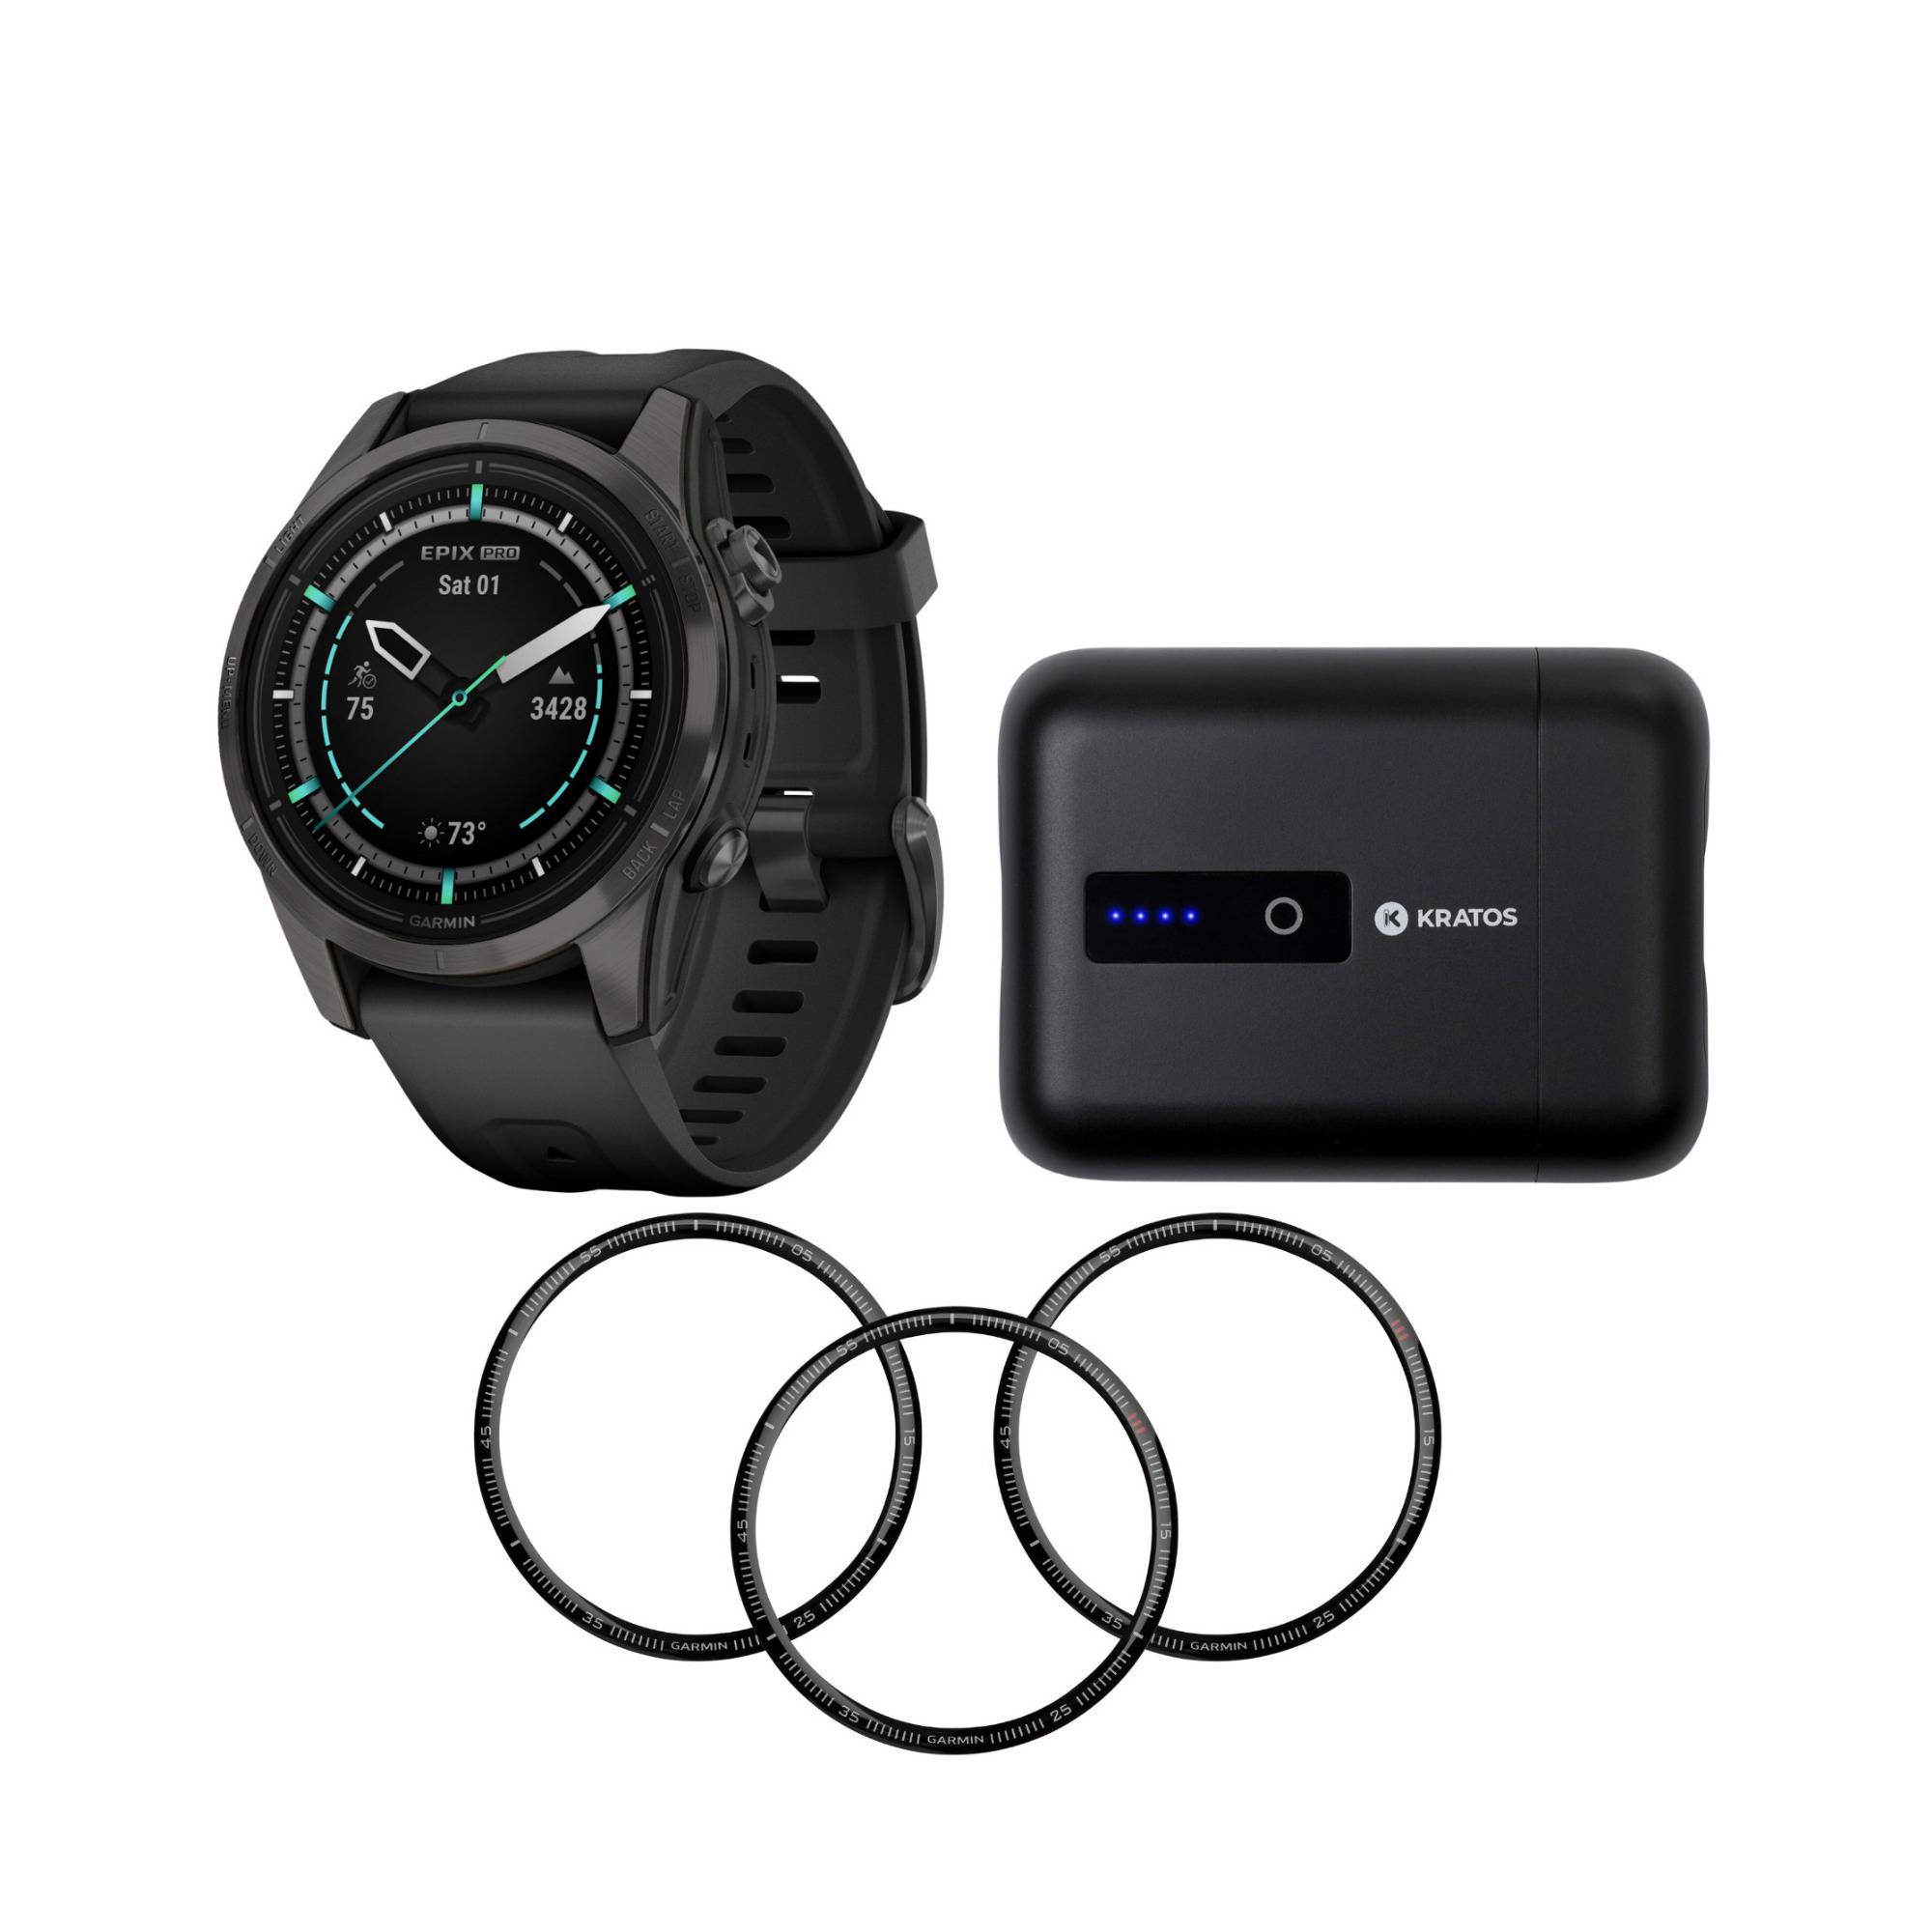 Garmin epix Pro Gen 2 Sapphire Edition Smartwatch (Carbon Gray) with Screen Protectors and Accessory